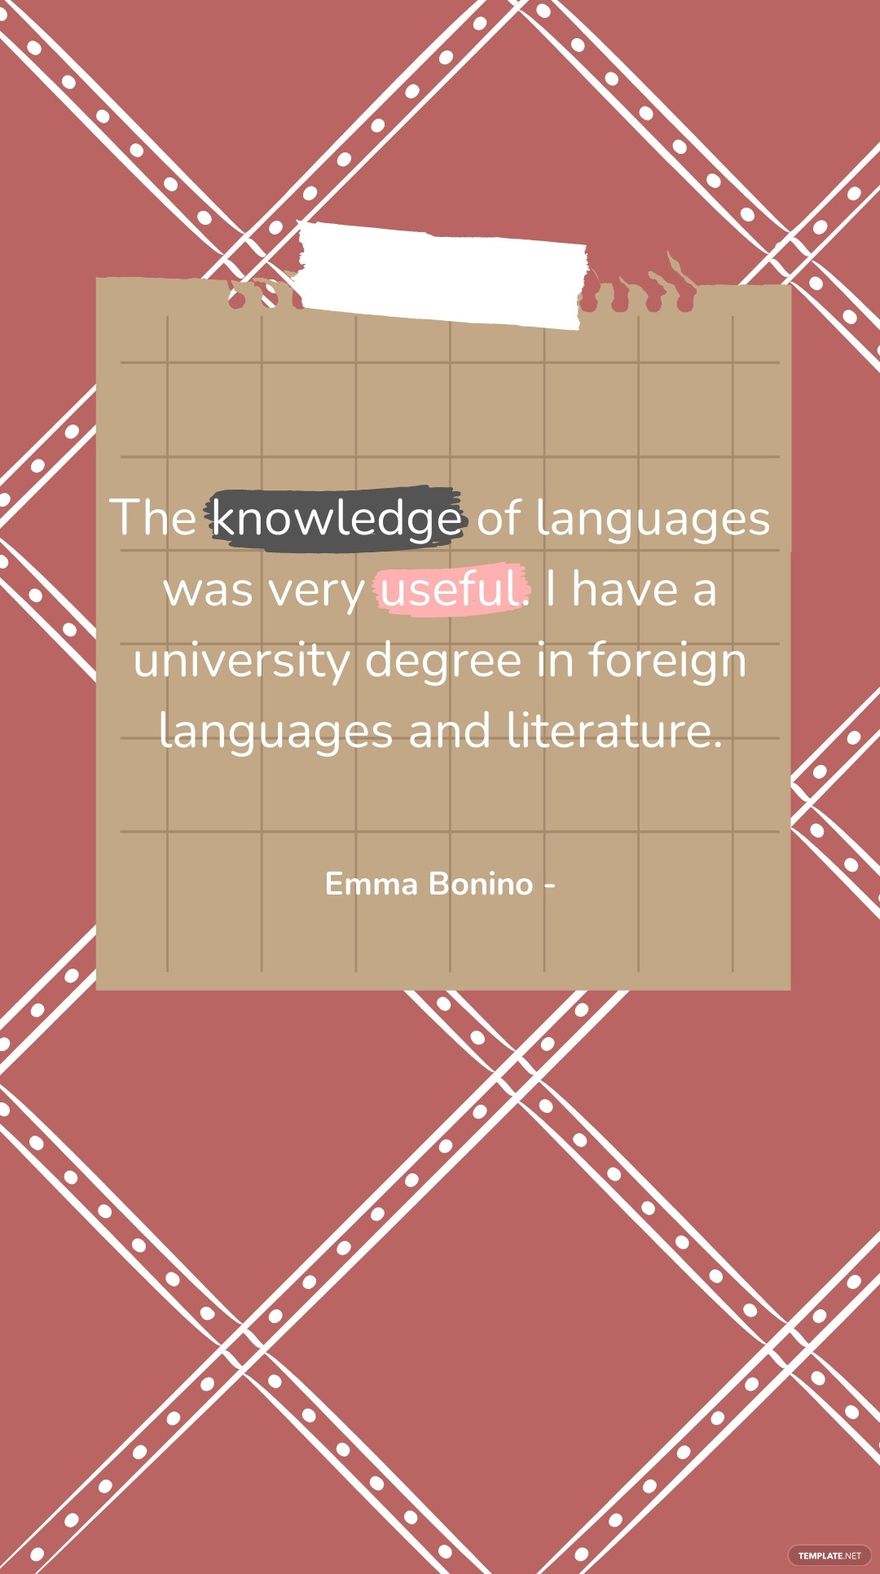 Emma Bonino - The knowledge of languages was very useful. I have a university degree in foreign languages and literature.